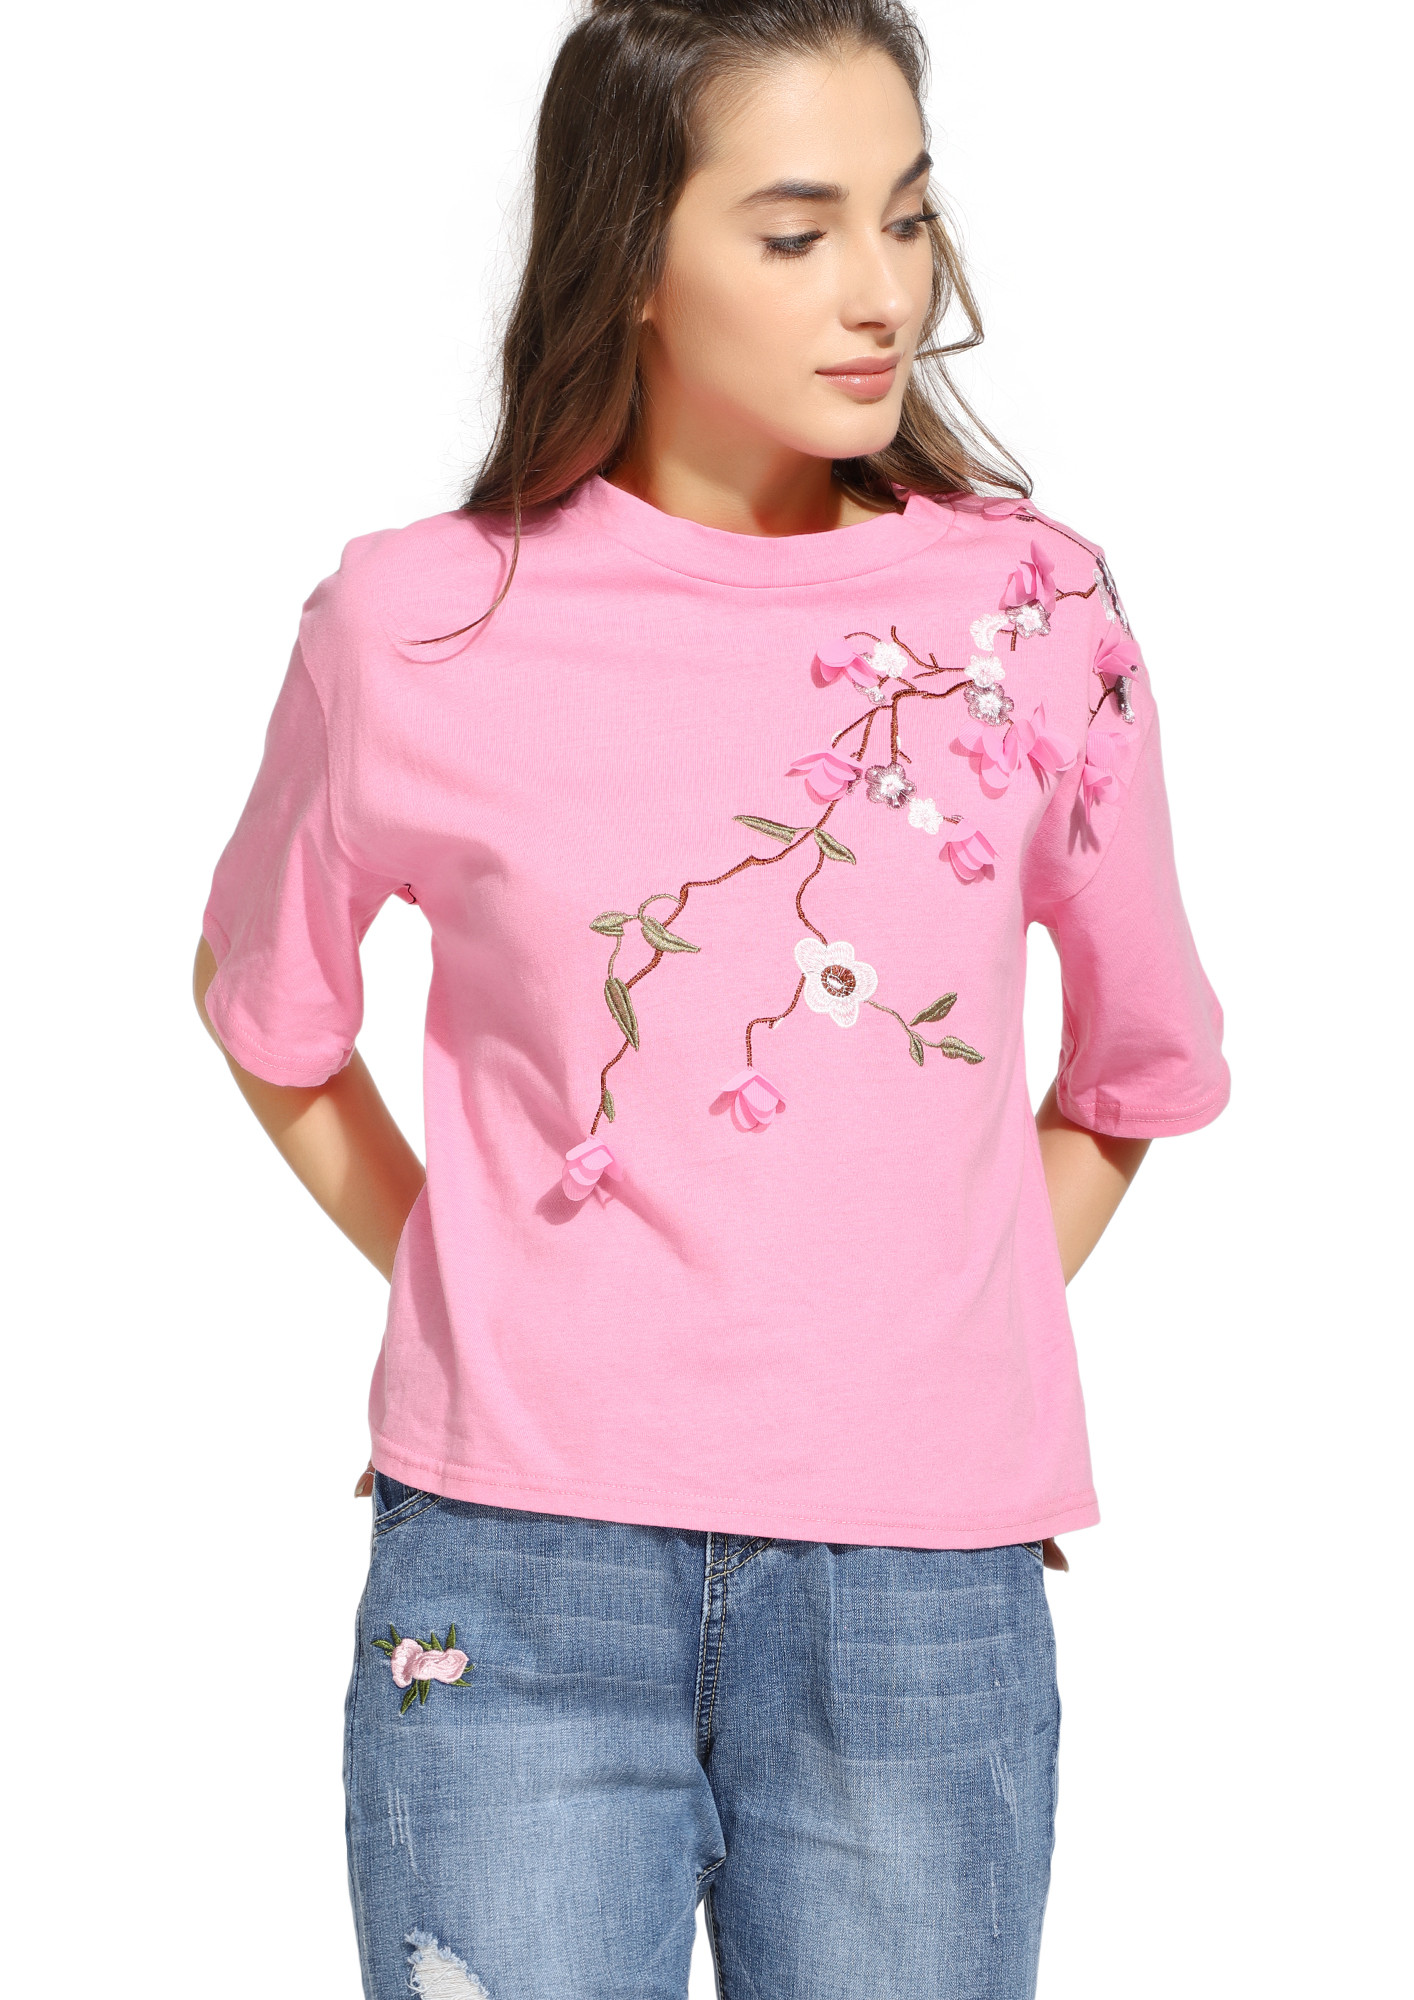 TREAT ME WITH FLOWERS PINK T-SHIRT